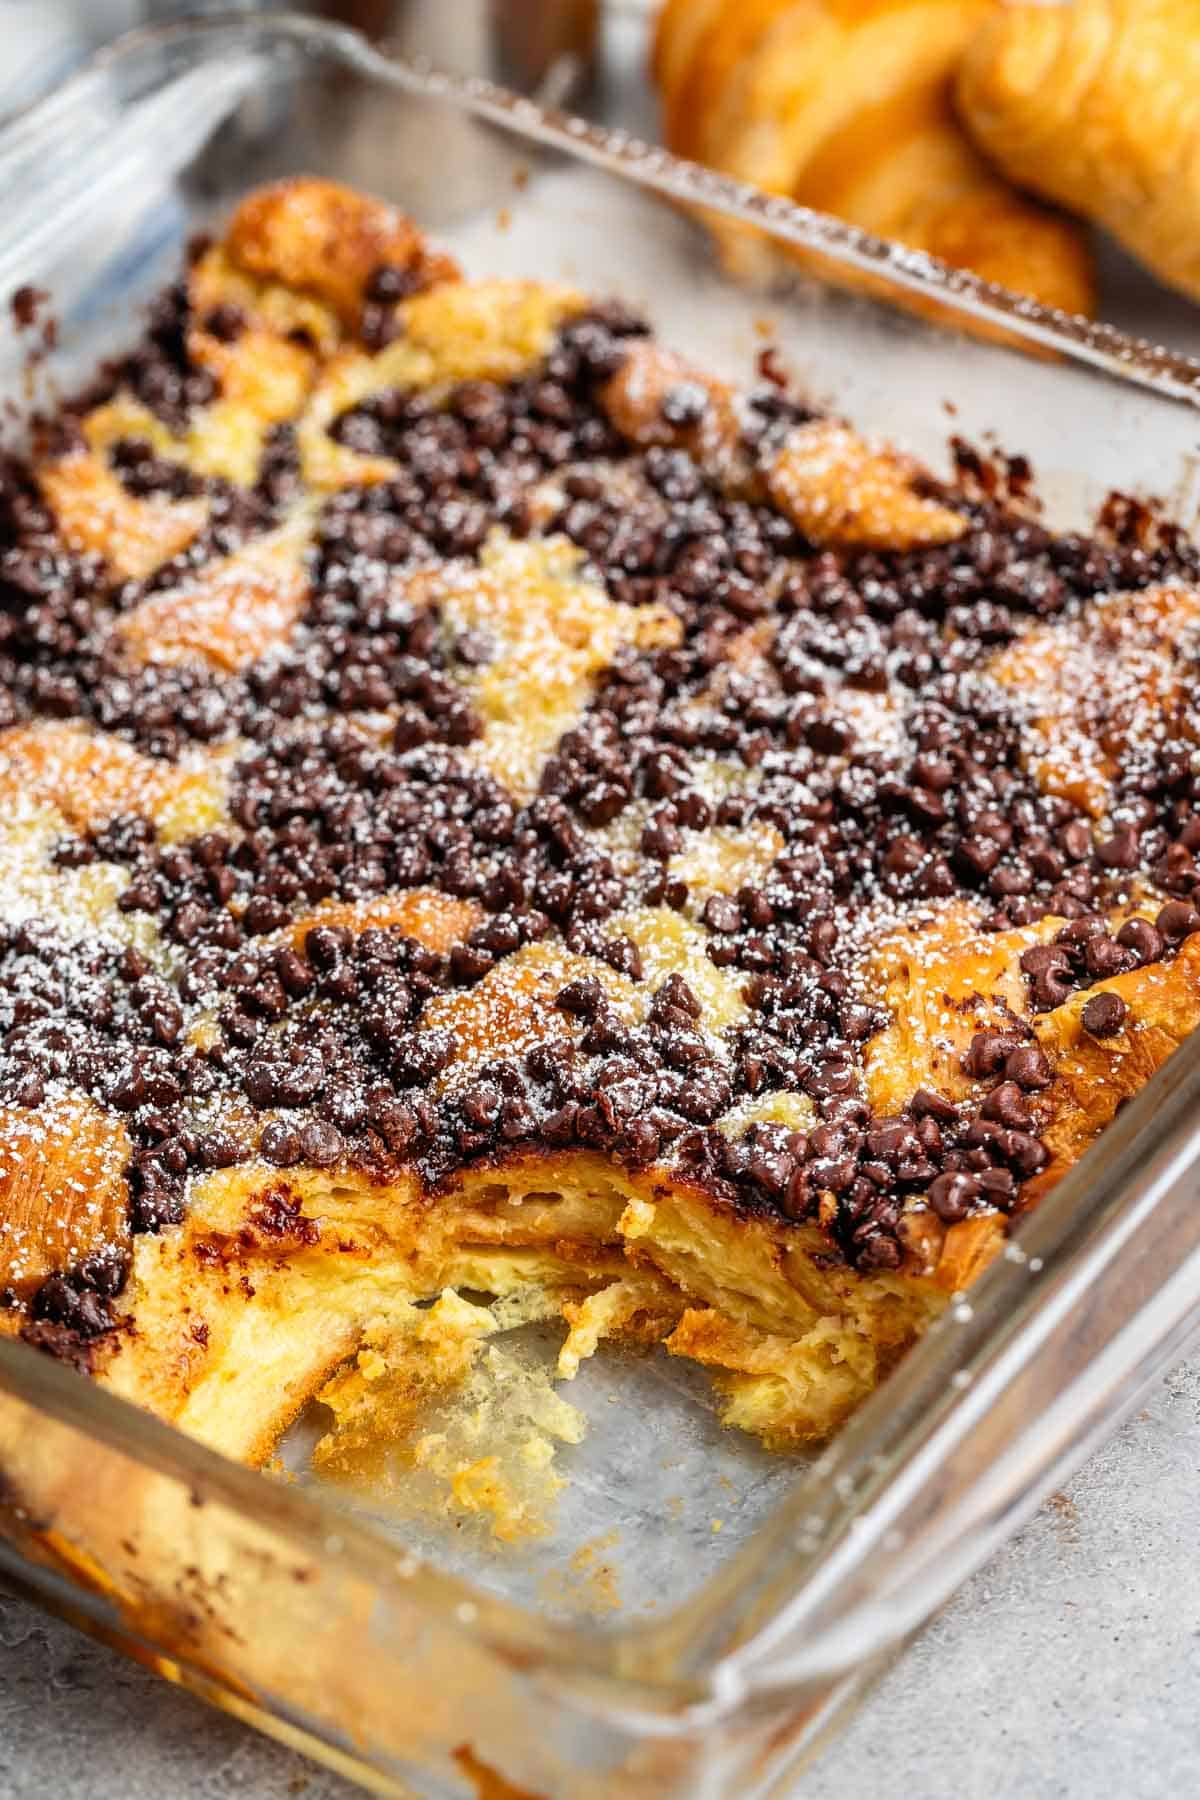 French toast in a square clear pan with chocolate chips and powdered sugar sprinkled on top.